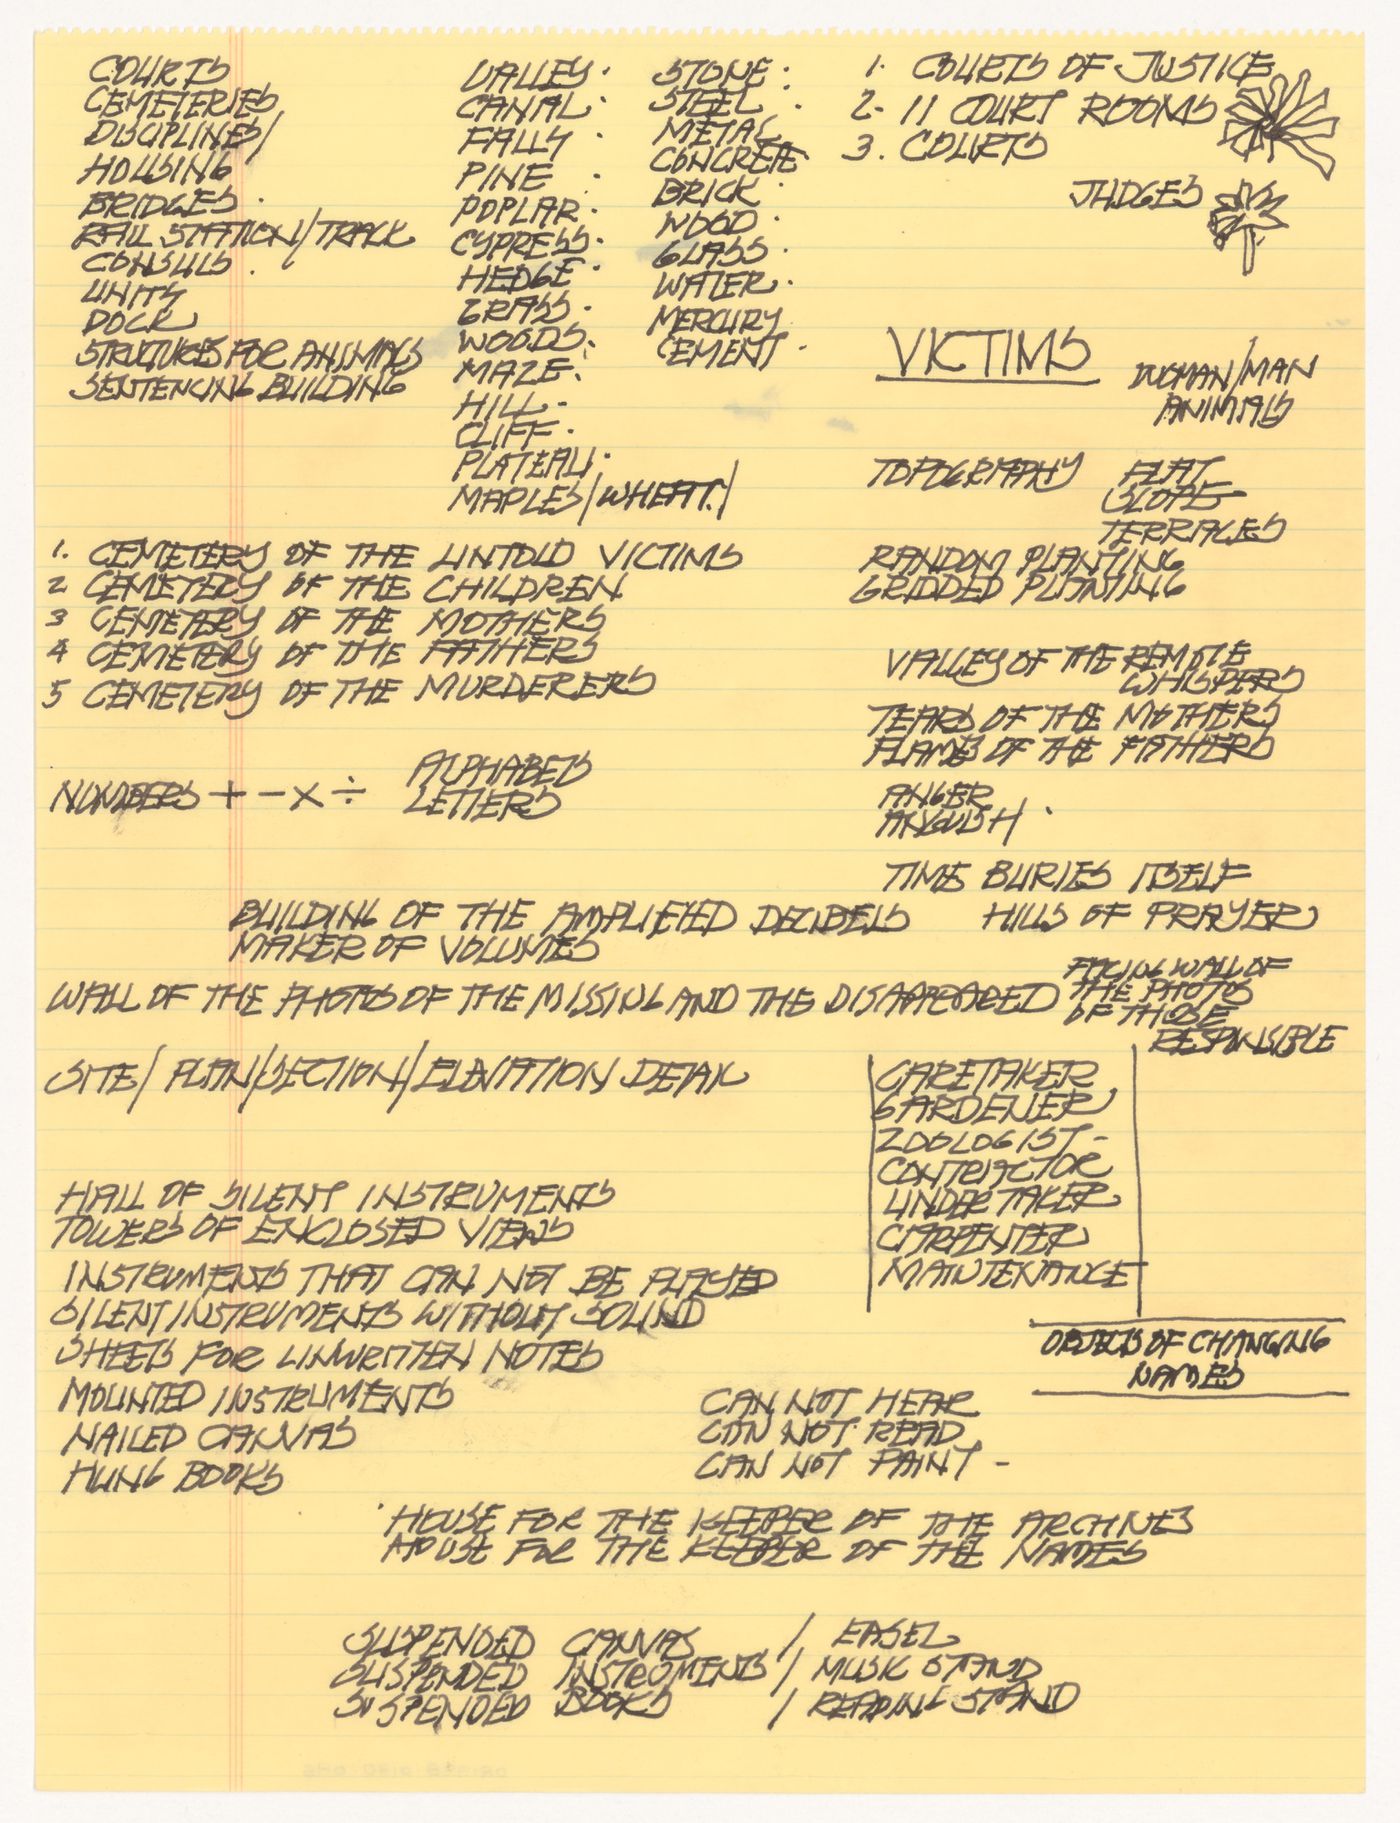 Notes for Victims II